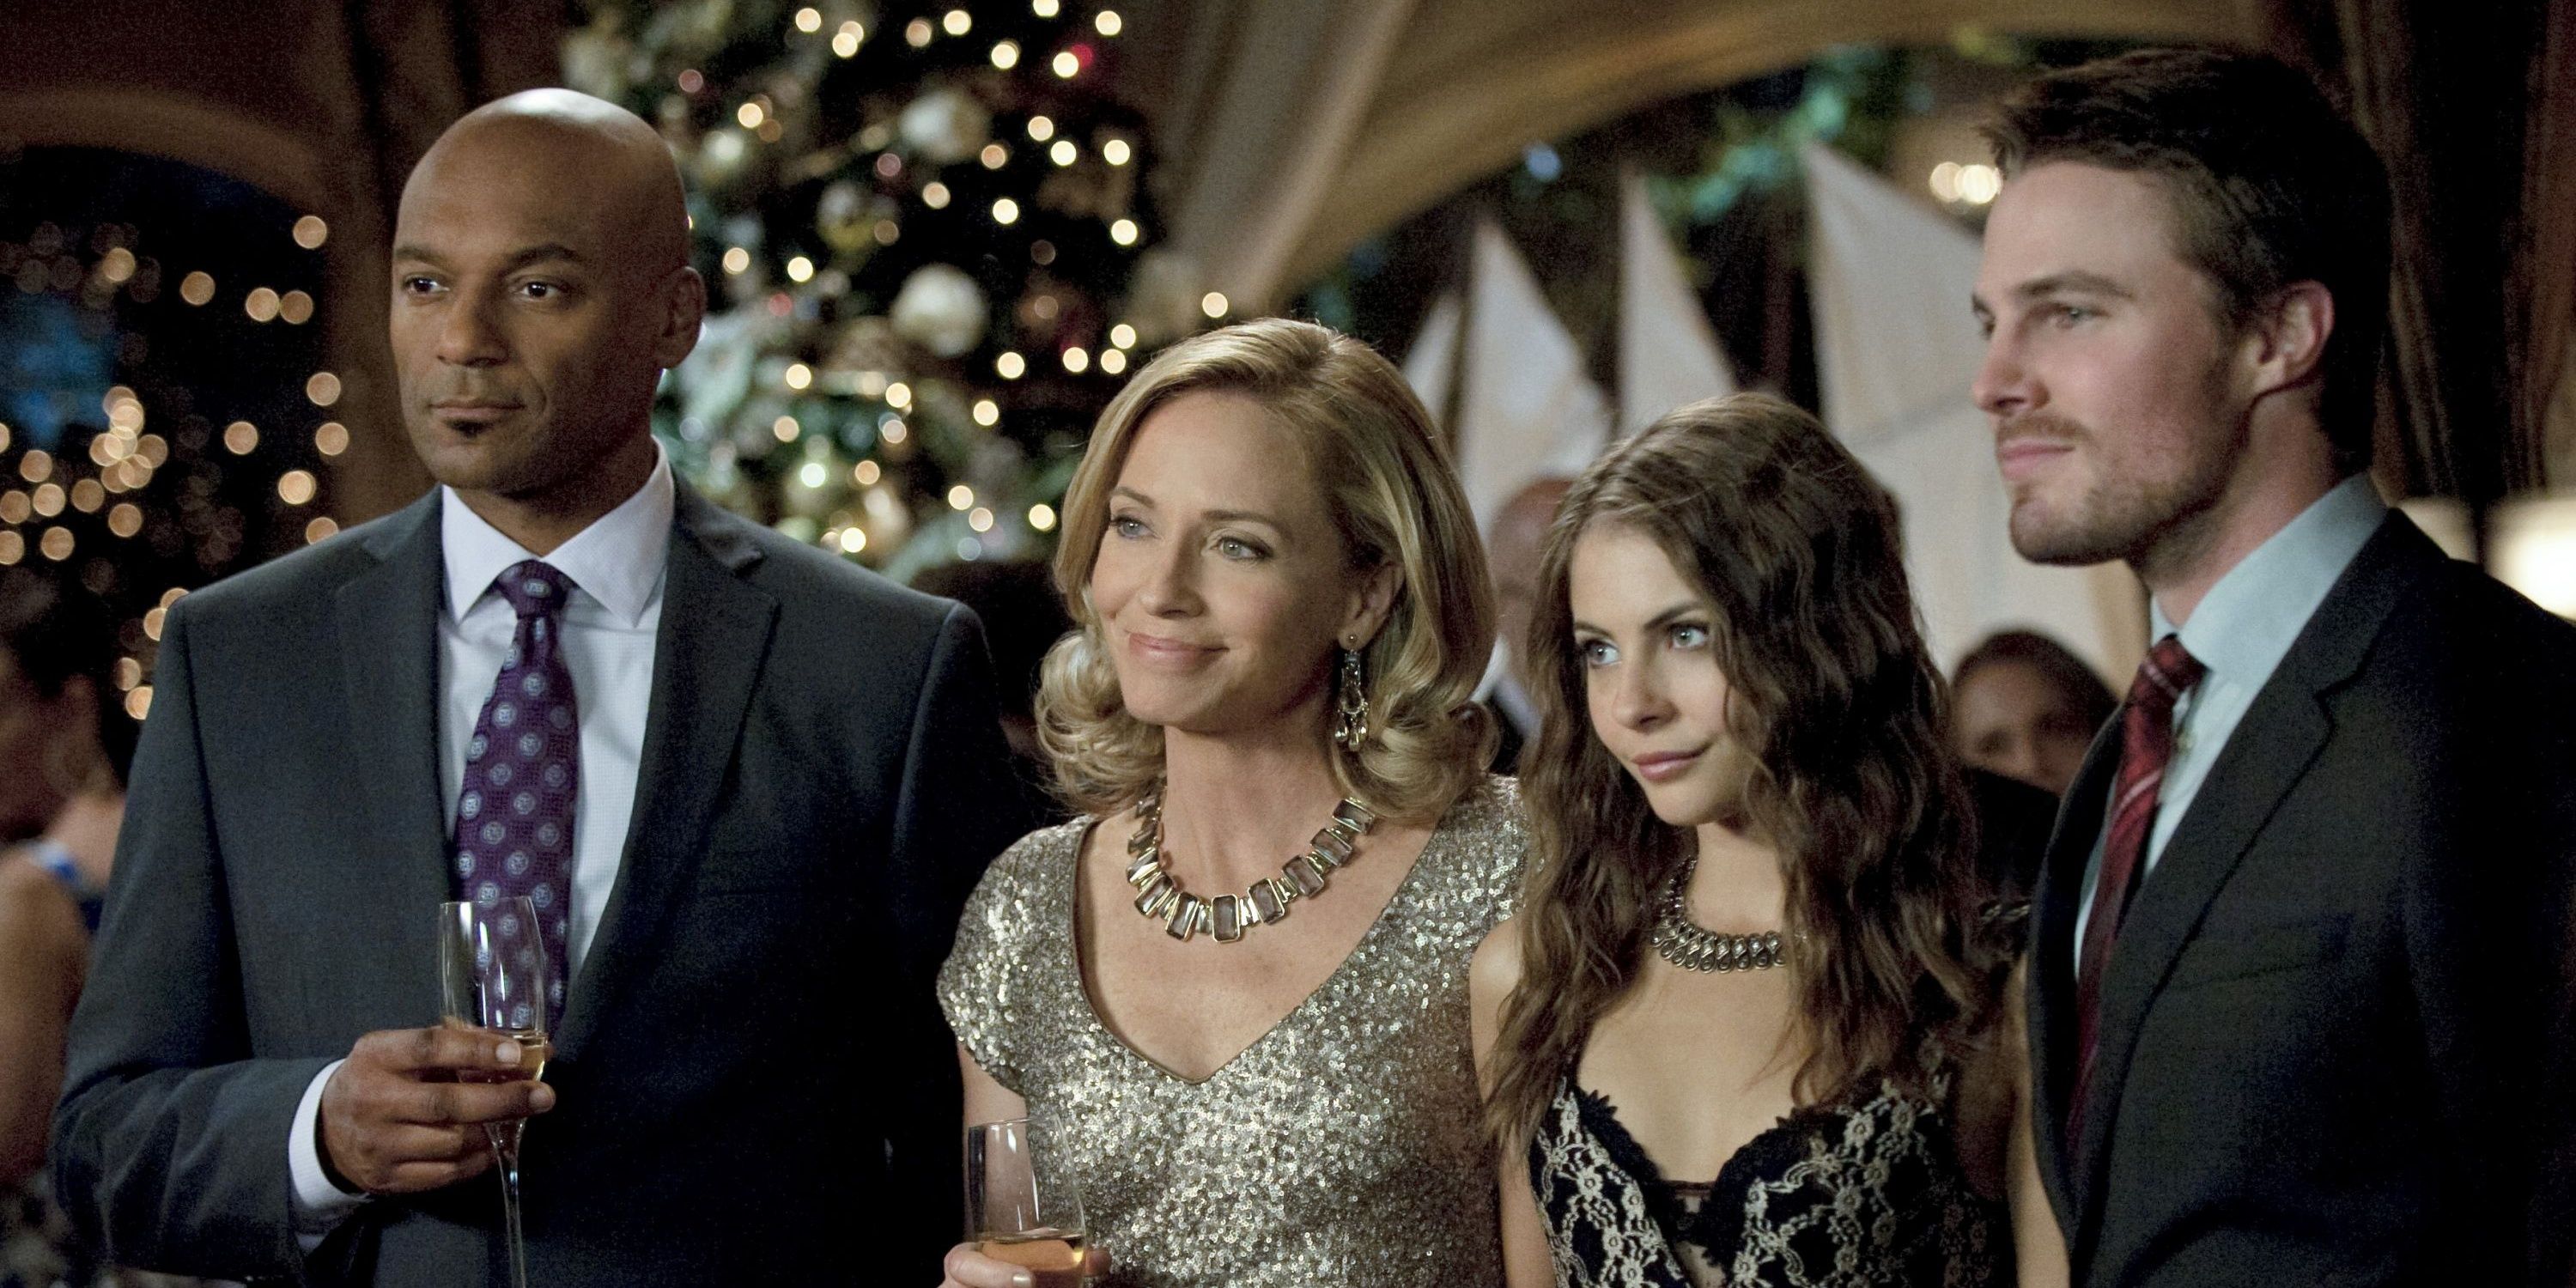 Arrow Walter, Moira, Thea and Oliver on a Christmas party